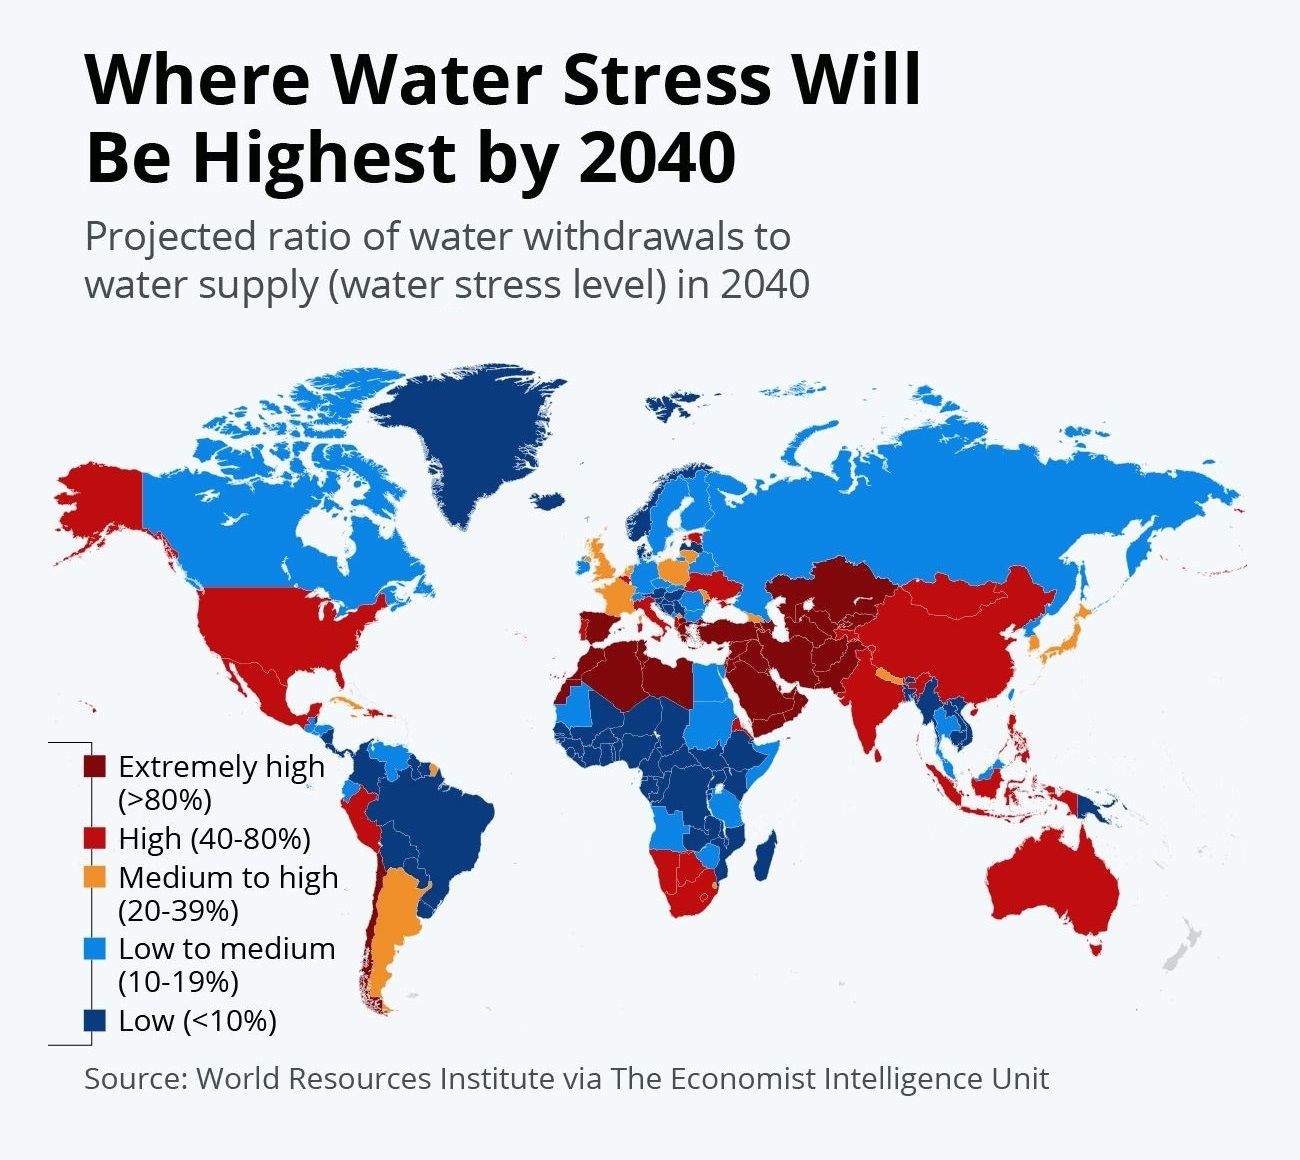 Water crisis will impact the most populated regions by 2040. Around 74% of natural disasters between 2001 and 2018 were water-related, including...